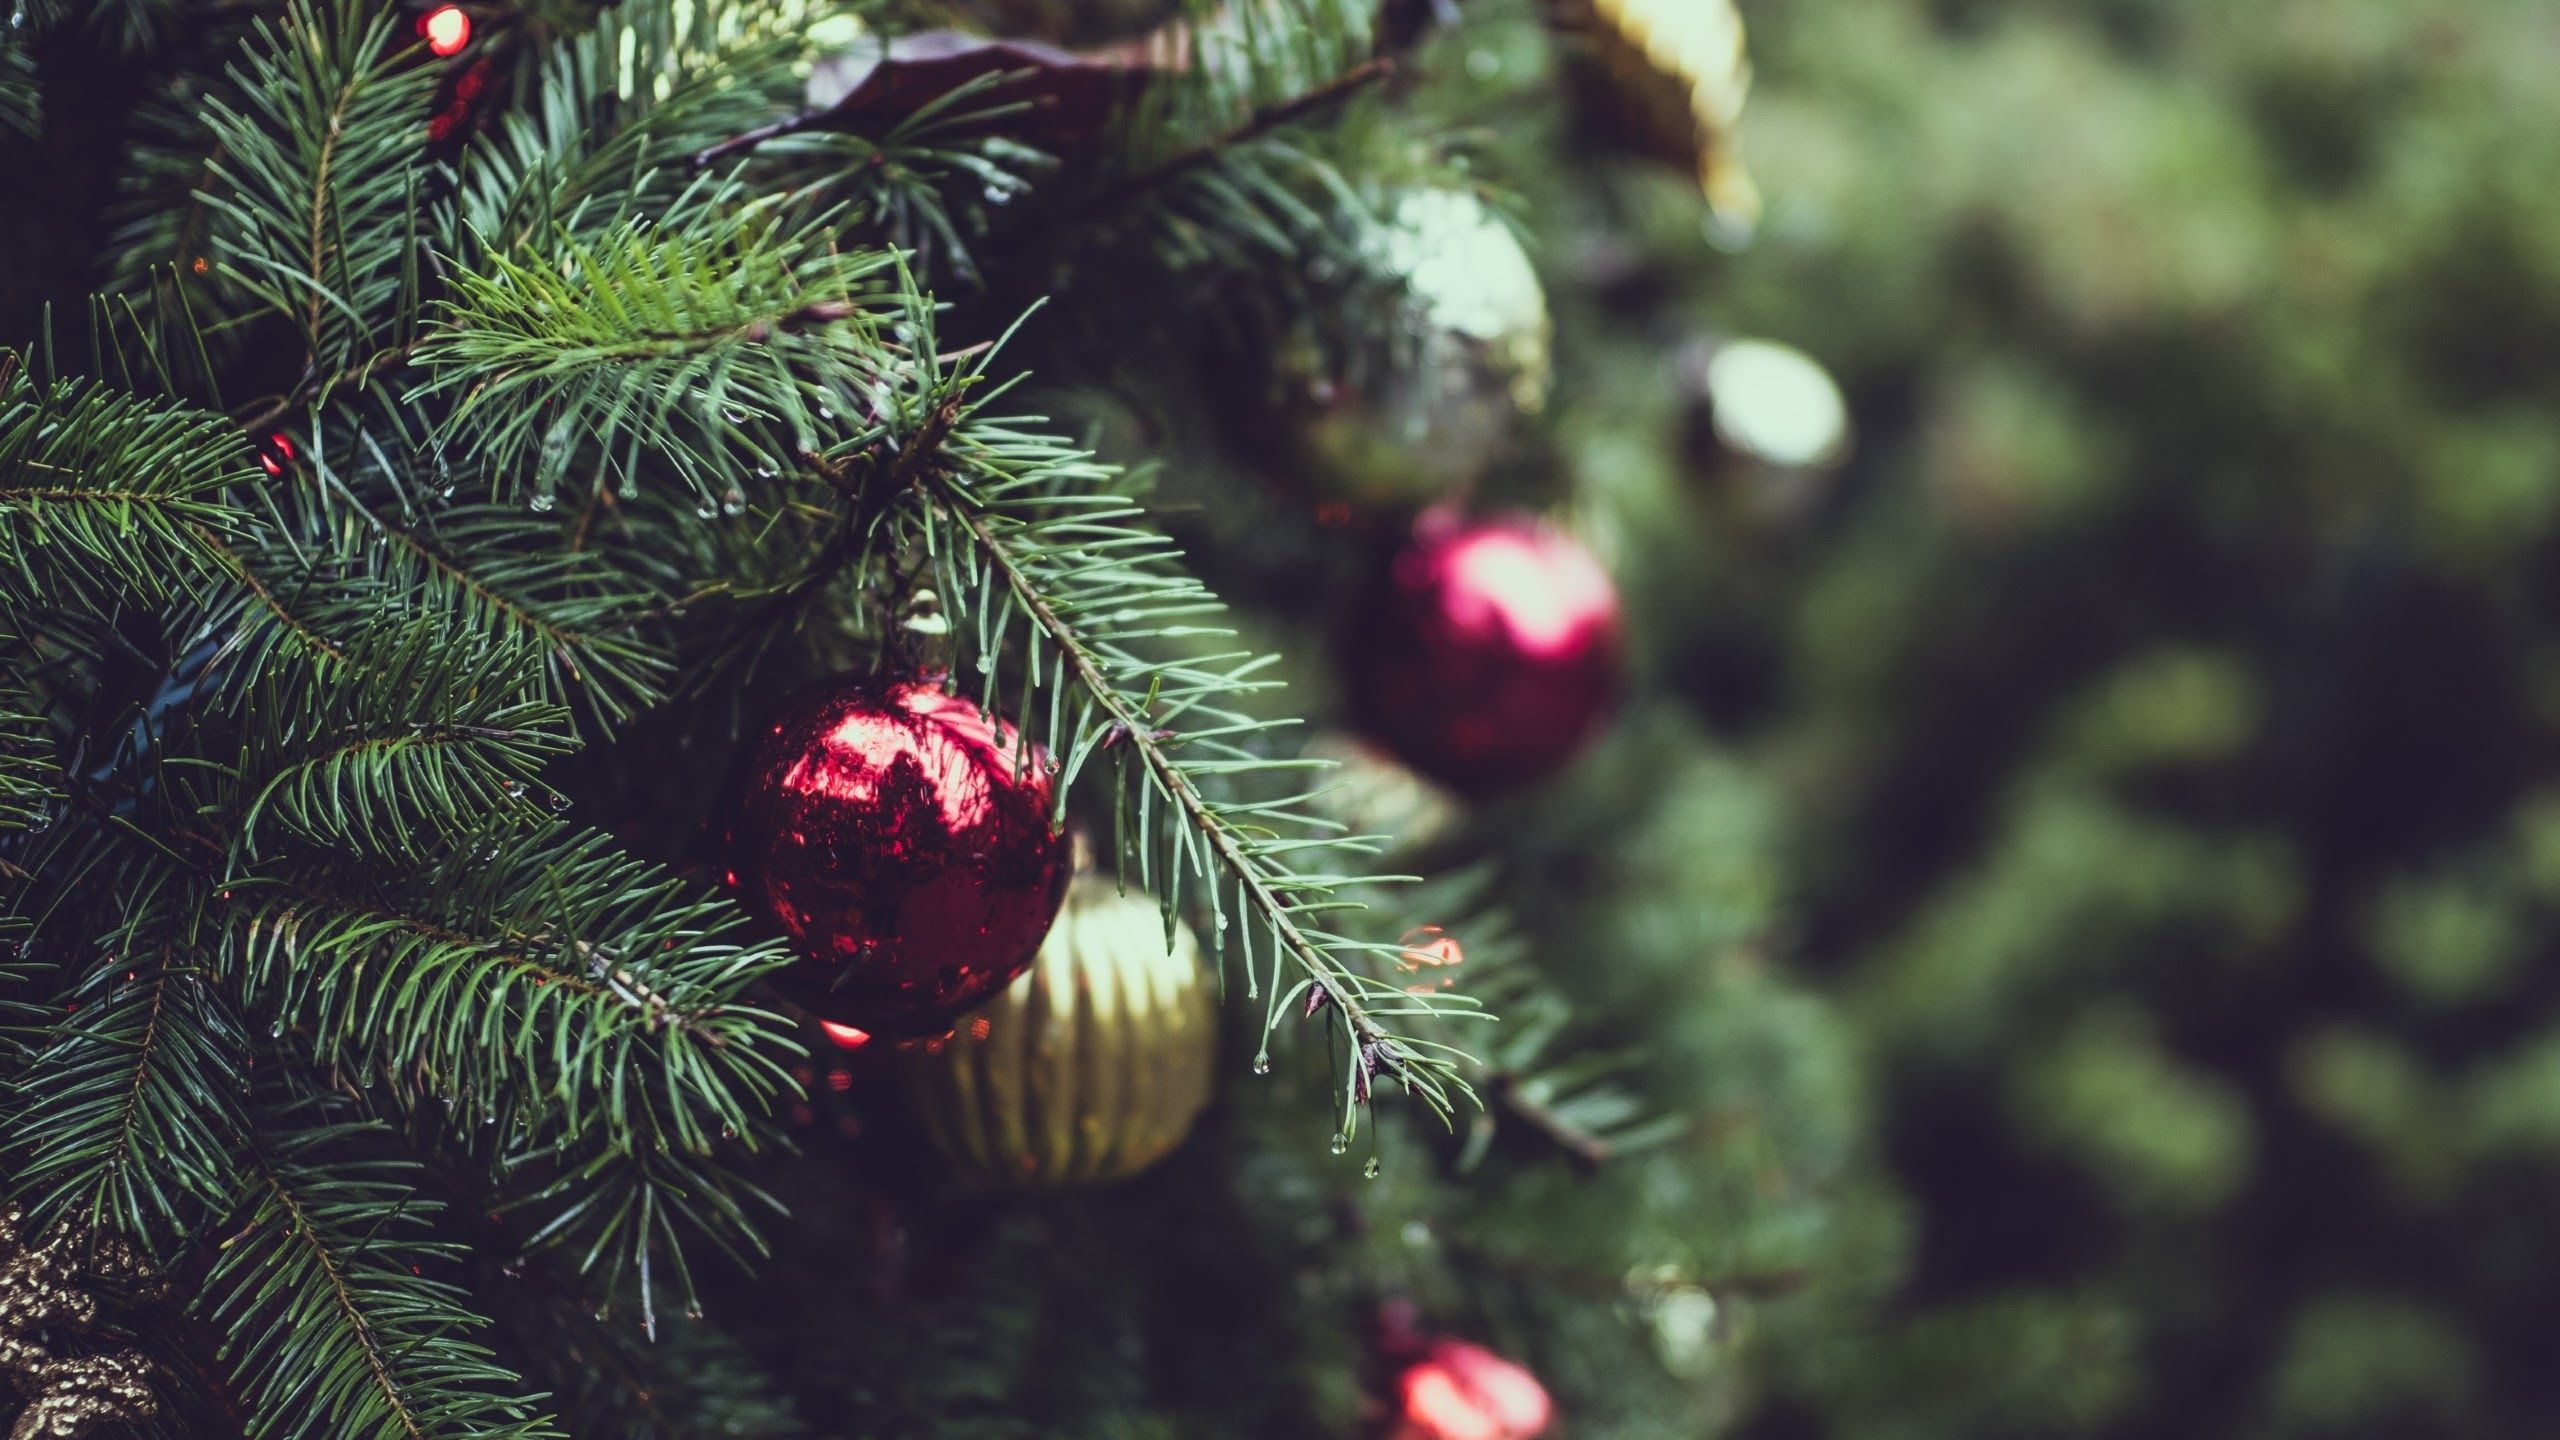 Download 2560x1440 Christmas Tree, Ornaments, Close Up, Blurred Wallpaper For IMac 27 Inch